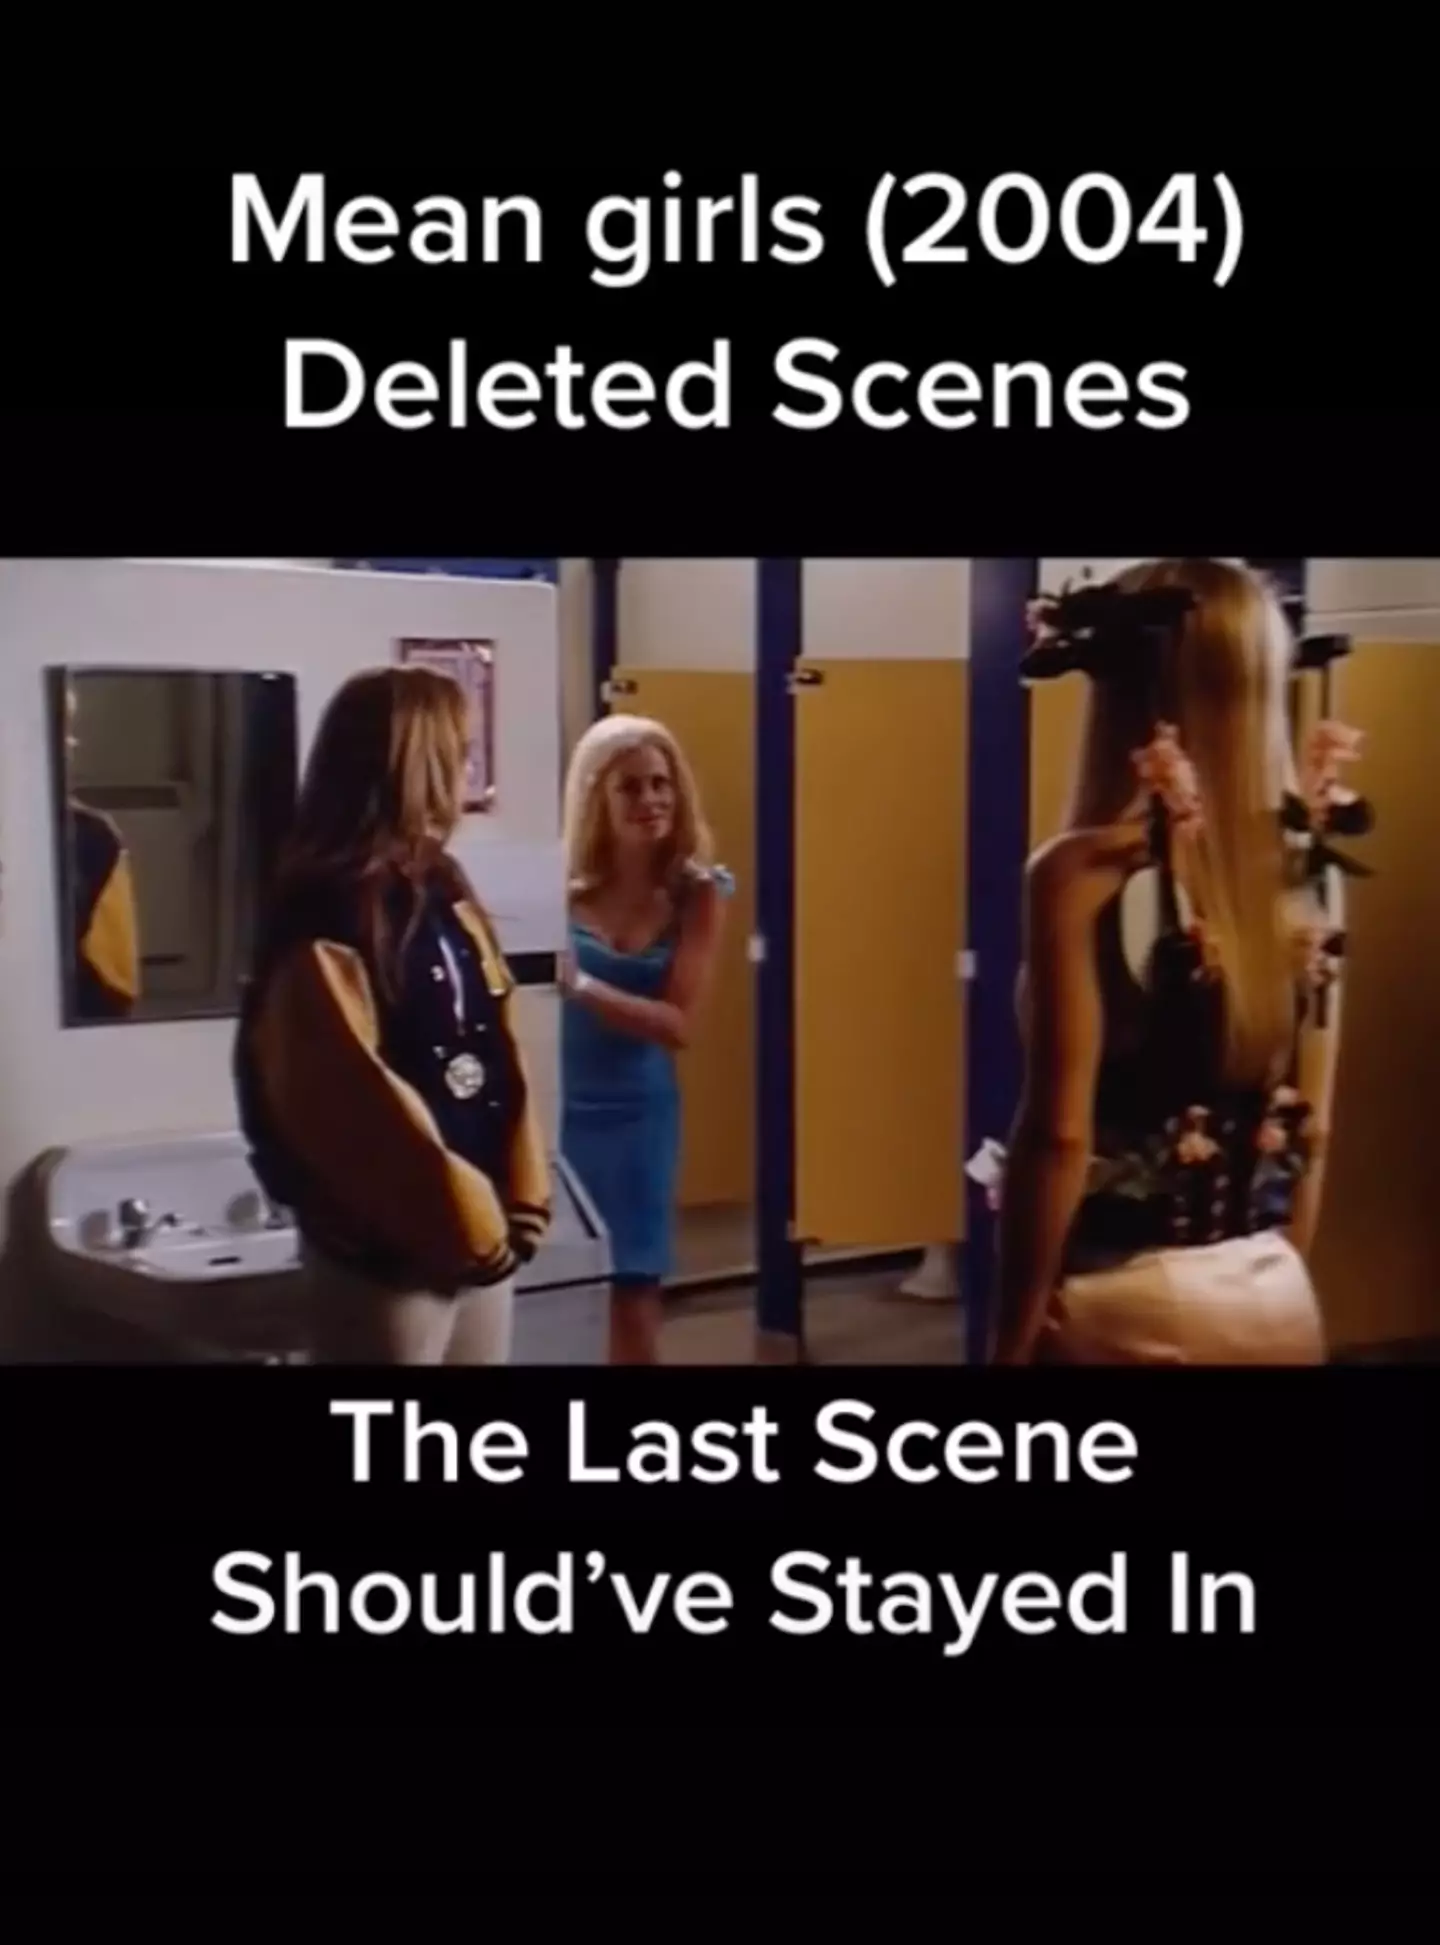 The deleted scene was shared on TikTok.